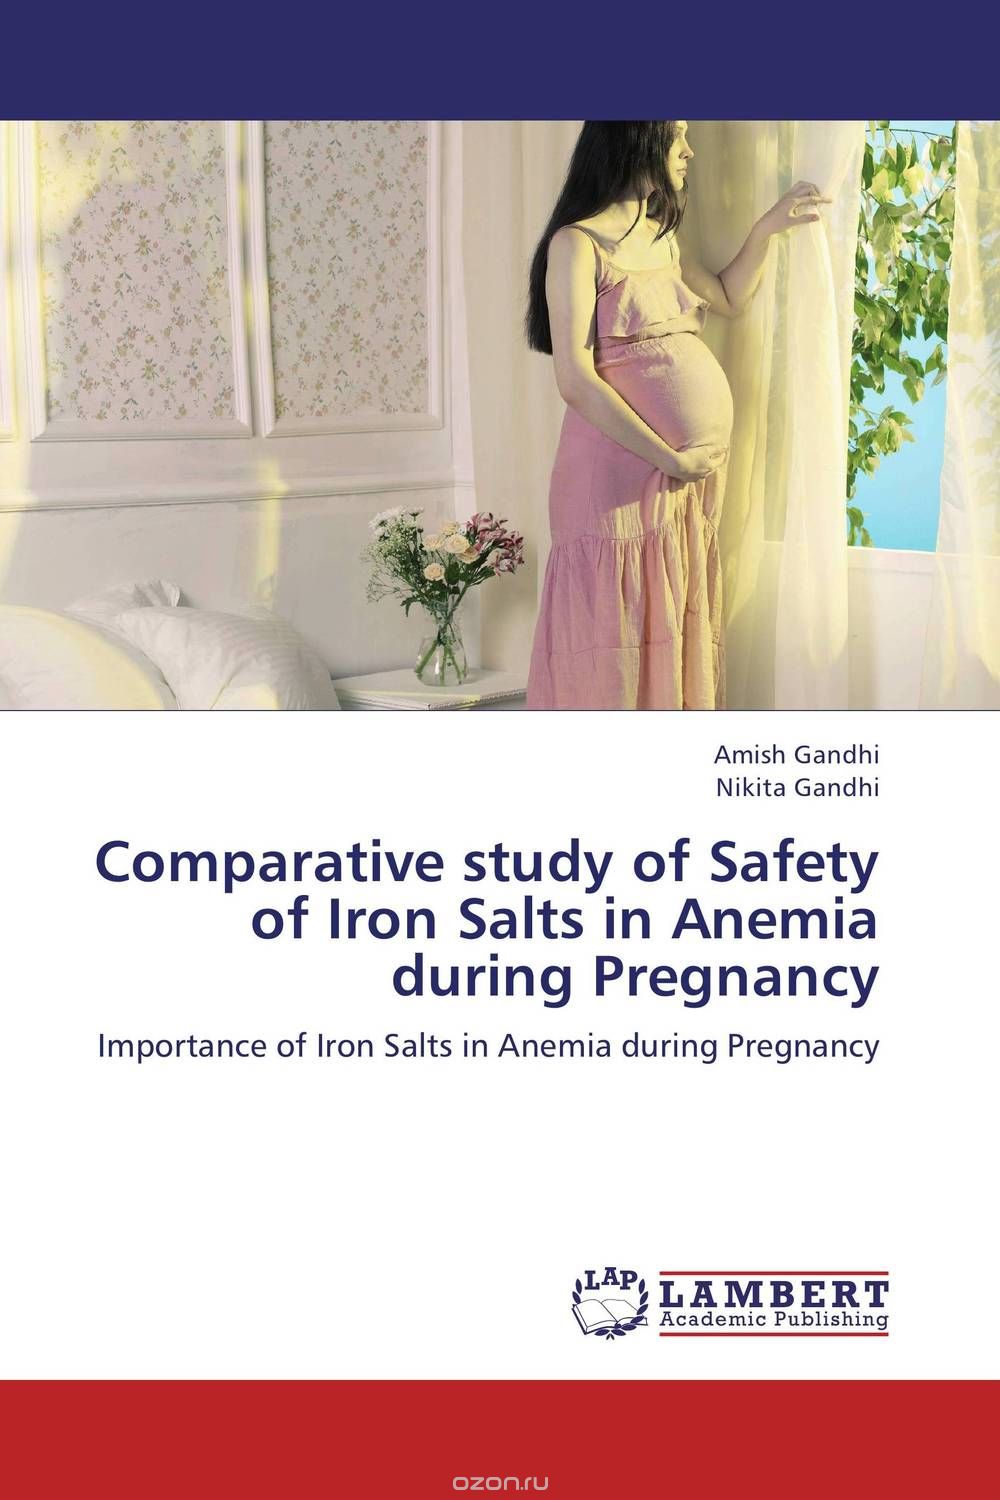 Скачать книгу "Comparative study of Safety of Iron Salts in Anemia during Pregnancy"